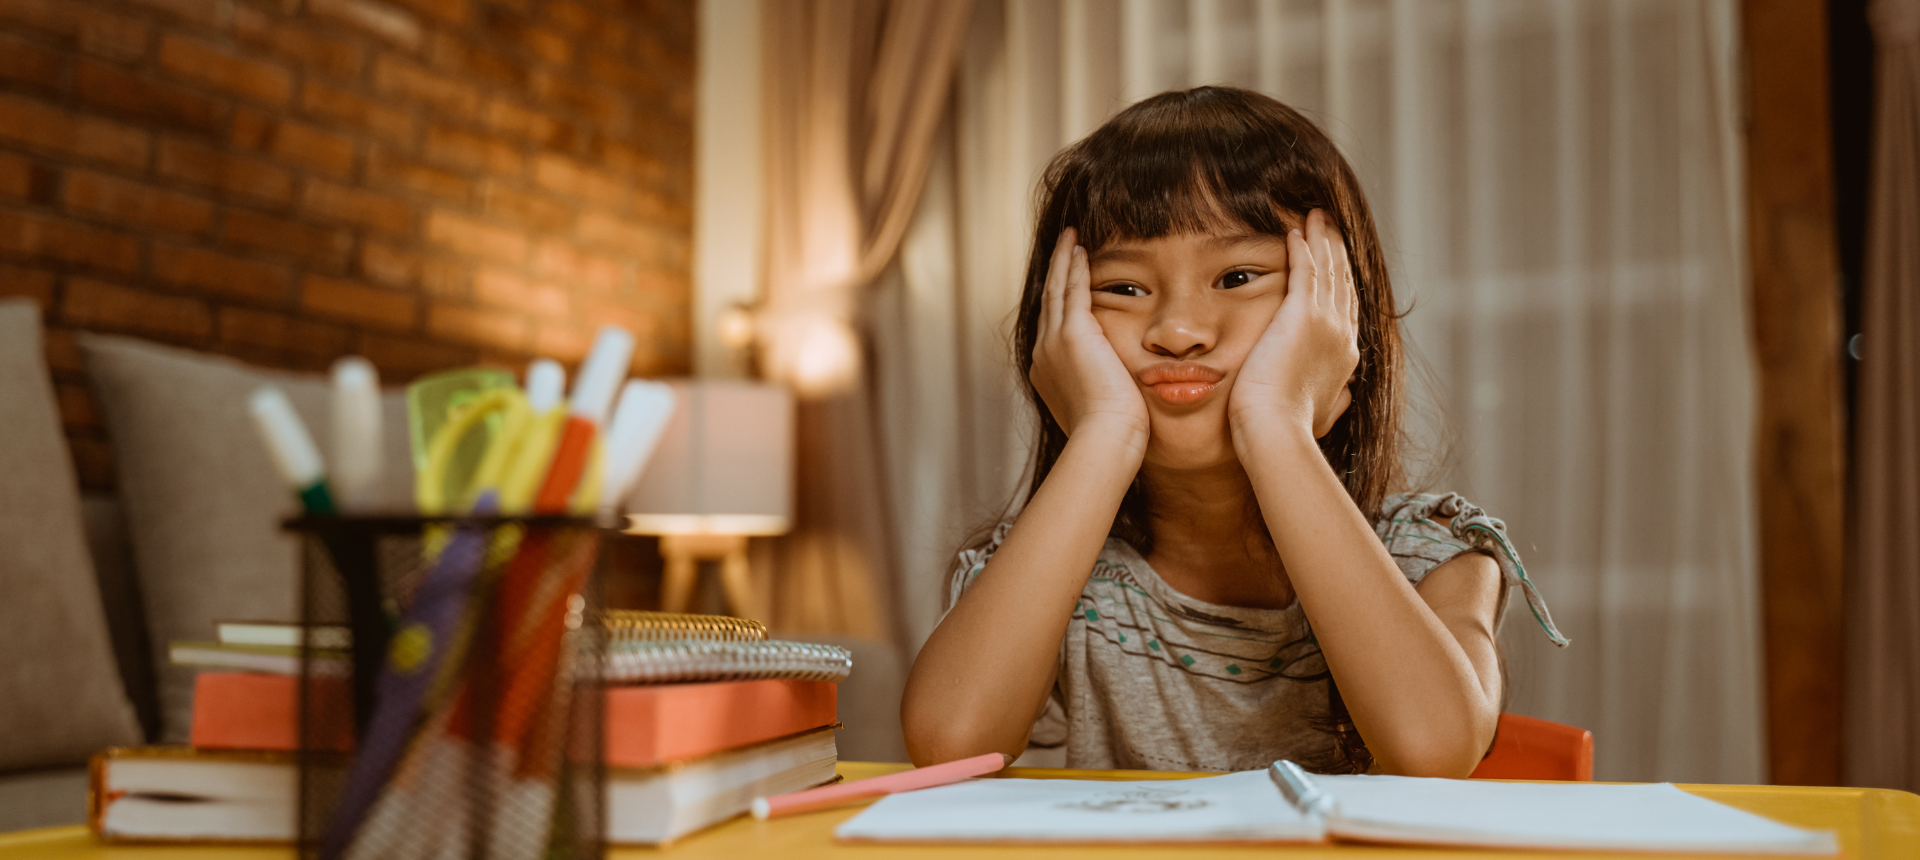 7 School Holiday Boredom Buster Ideas on Outschool